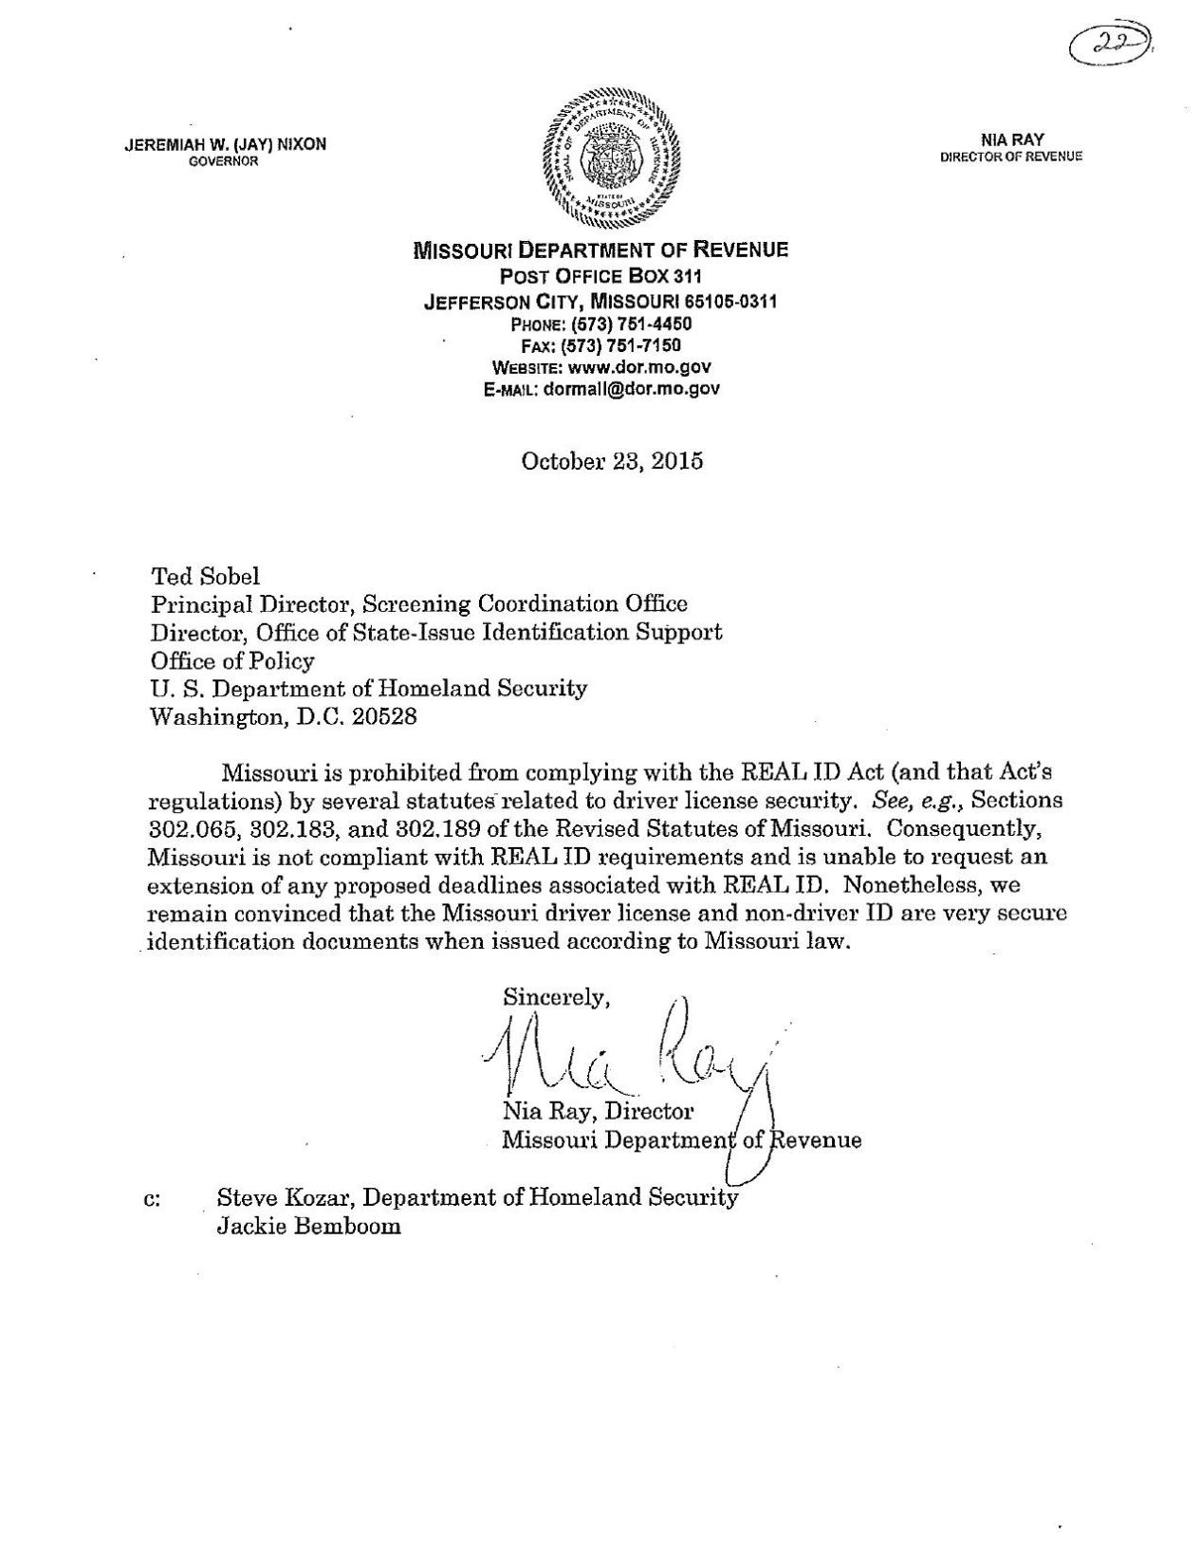 Letter from Department of Revenue to Homeland Security